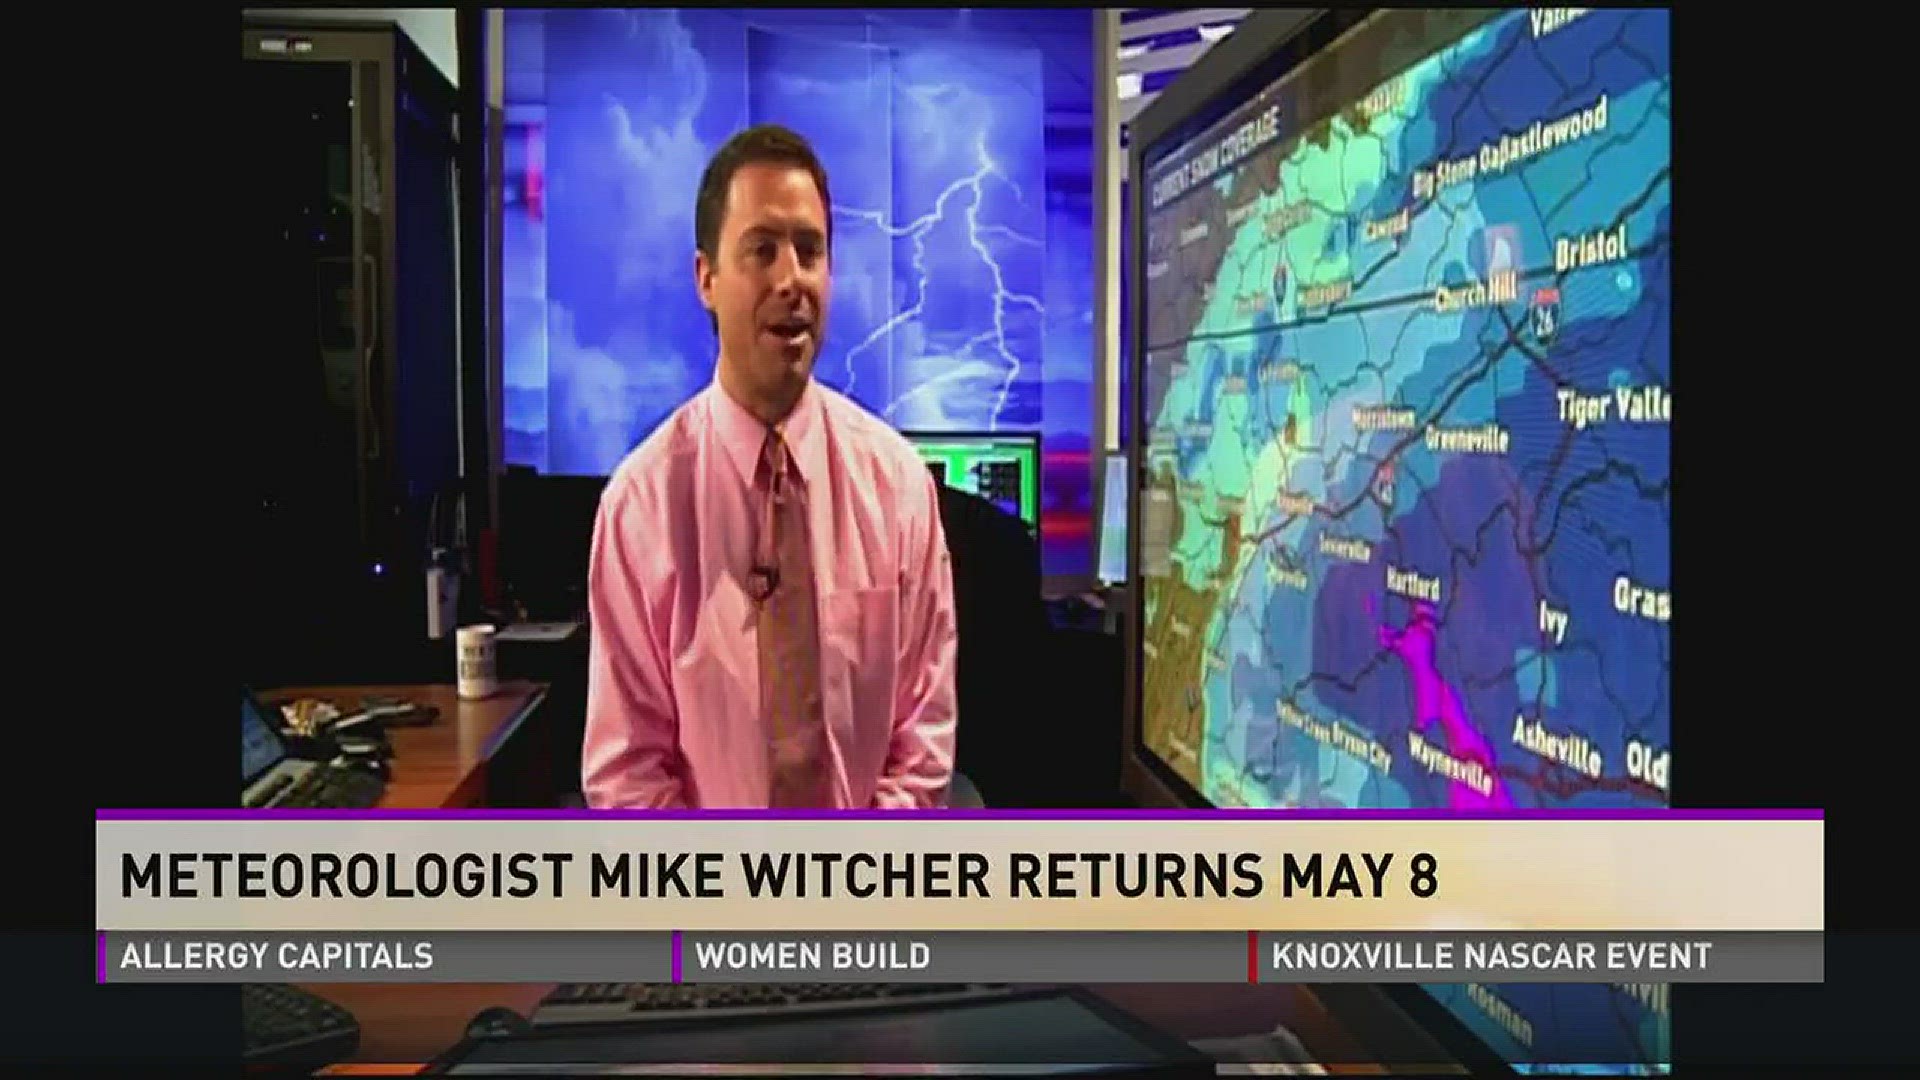 Meteorologist Mike Witcher is returning to Knoxville and the WBIR weather team.